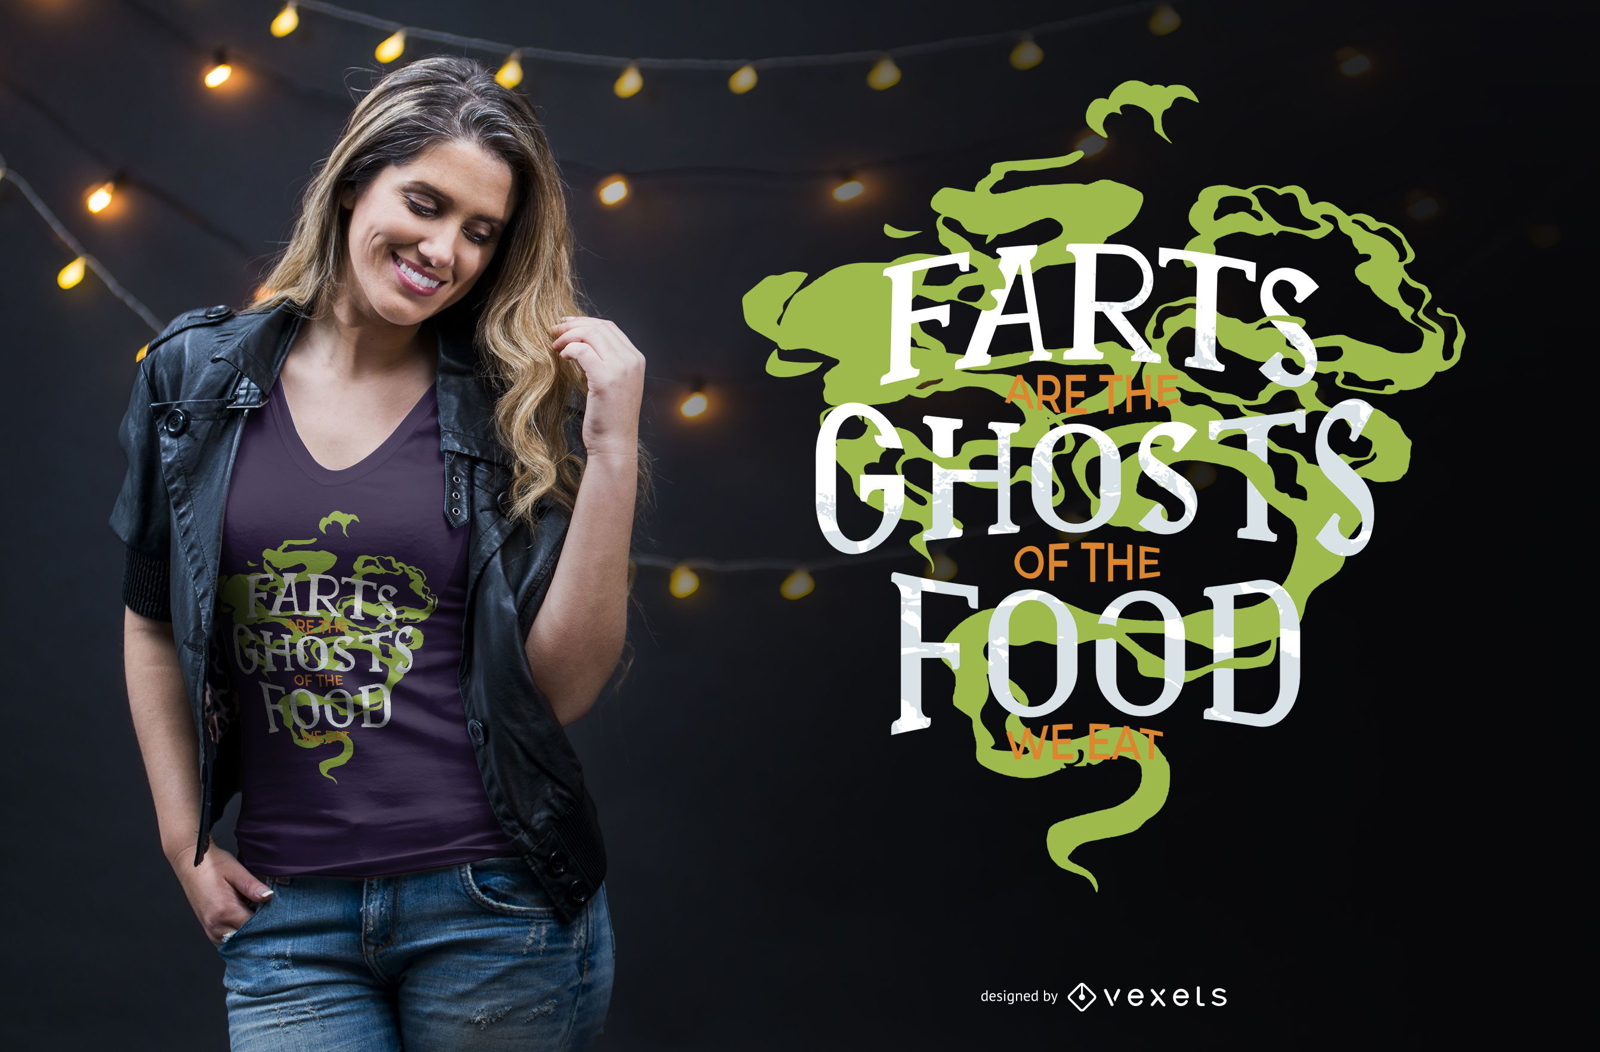 Fart Ghost Funny Quote T-shirt Design